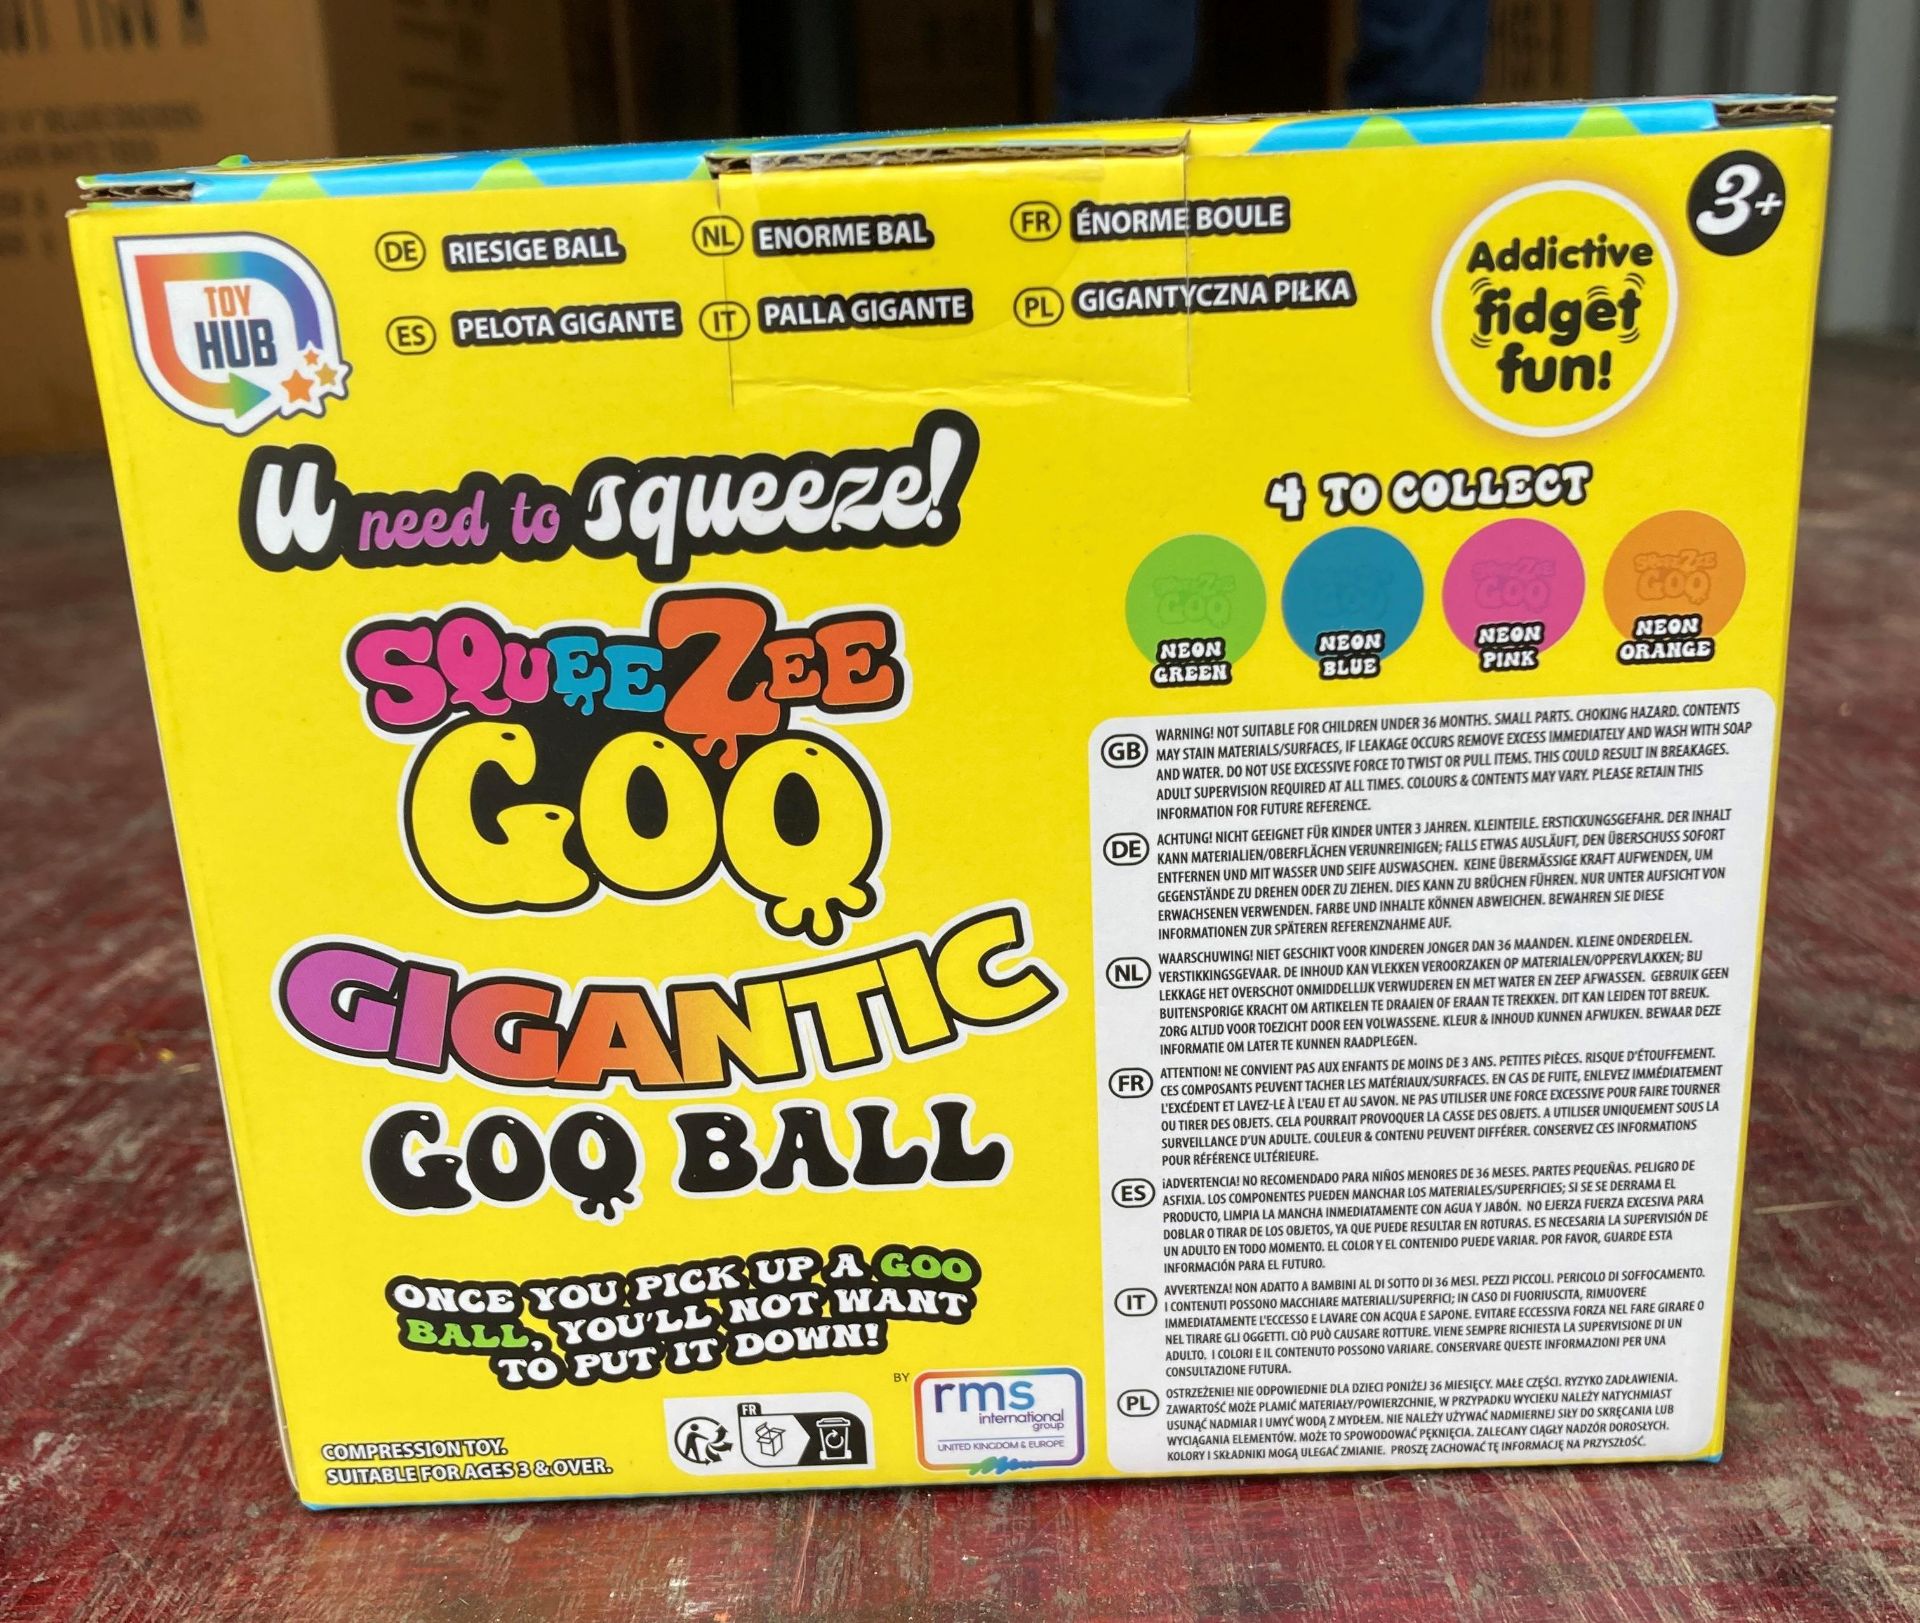 72 x Gigantic Goo squeeze balls/fidget toys (6 x outer boxes) (saleroom location: container 7) - Image 3 of 4